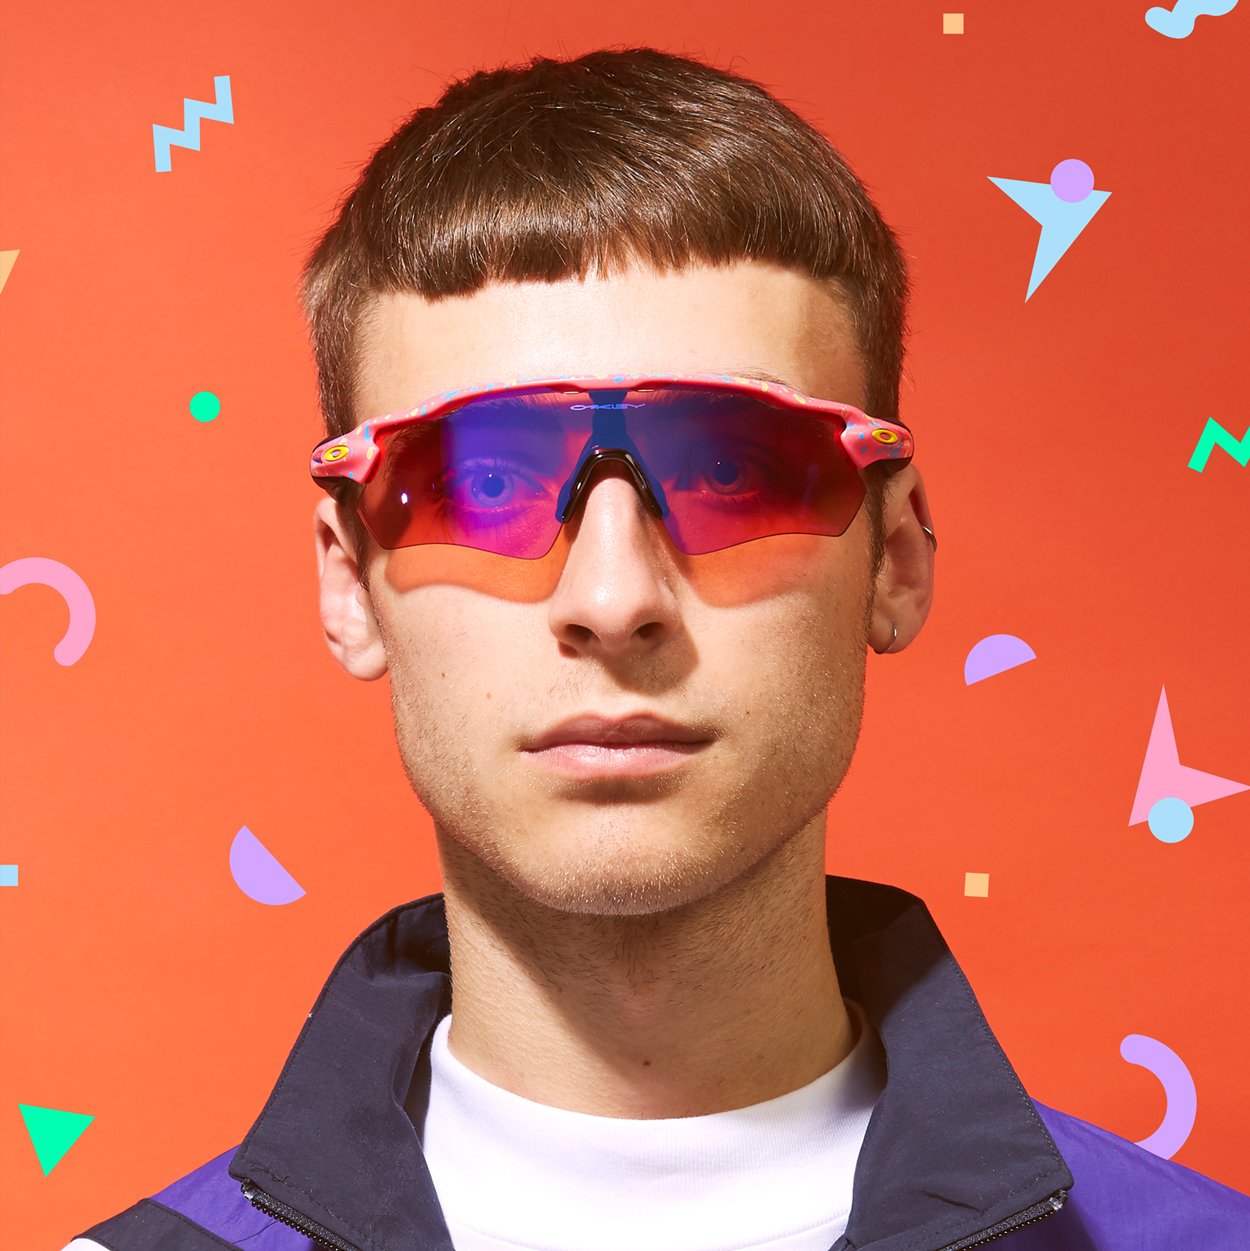 size? on Twitter: design paying homage to their painted frames the past, the Splatterfade collection sees @oakley decorate their shades in vibrant colours pops of hand-decorated paint on